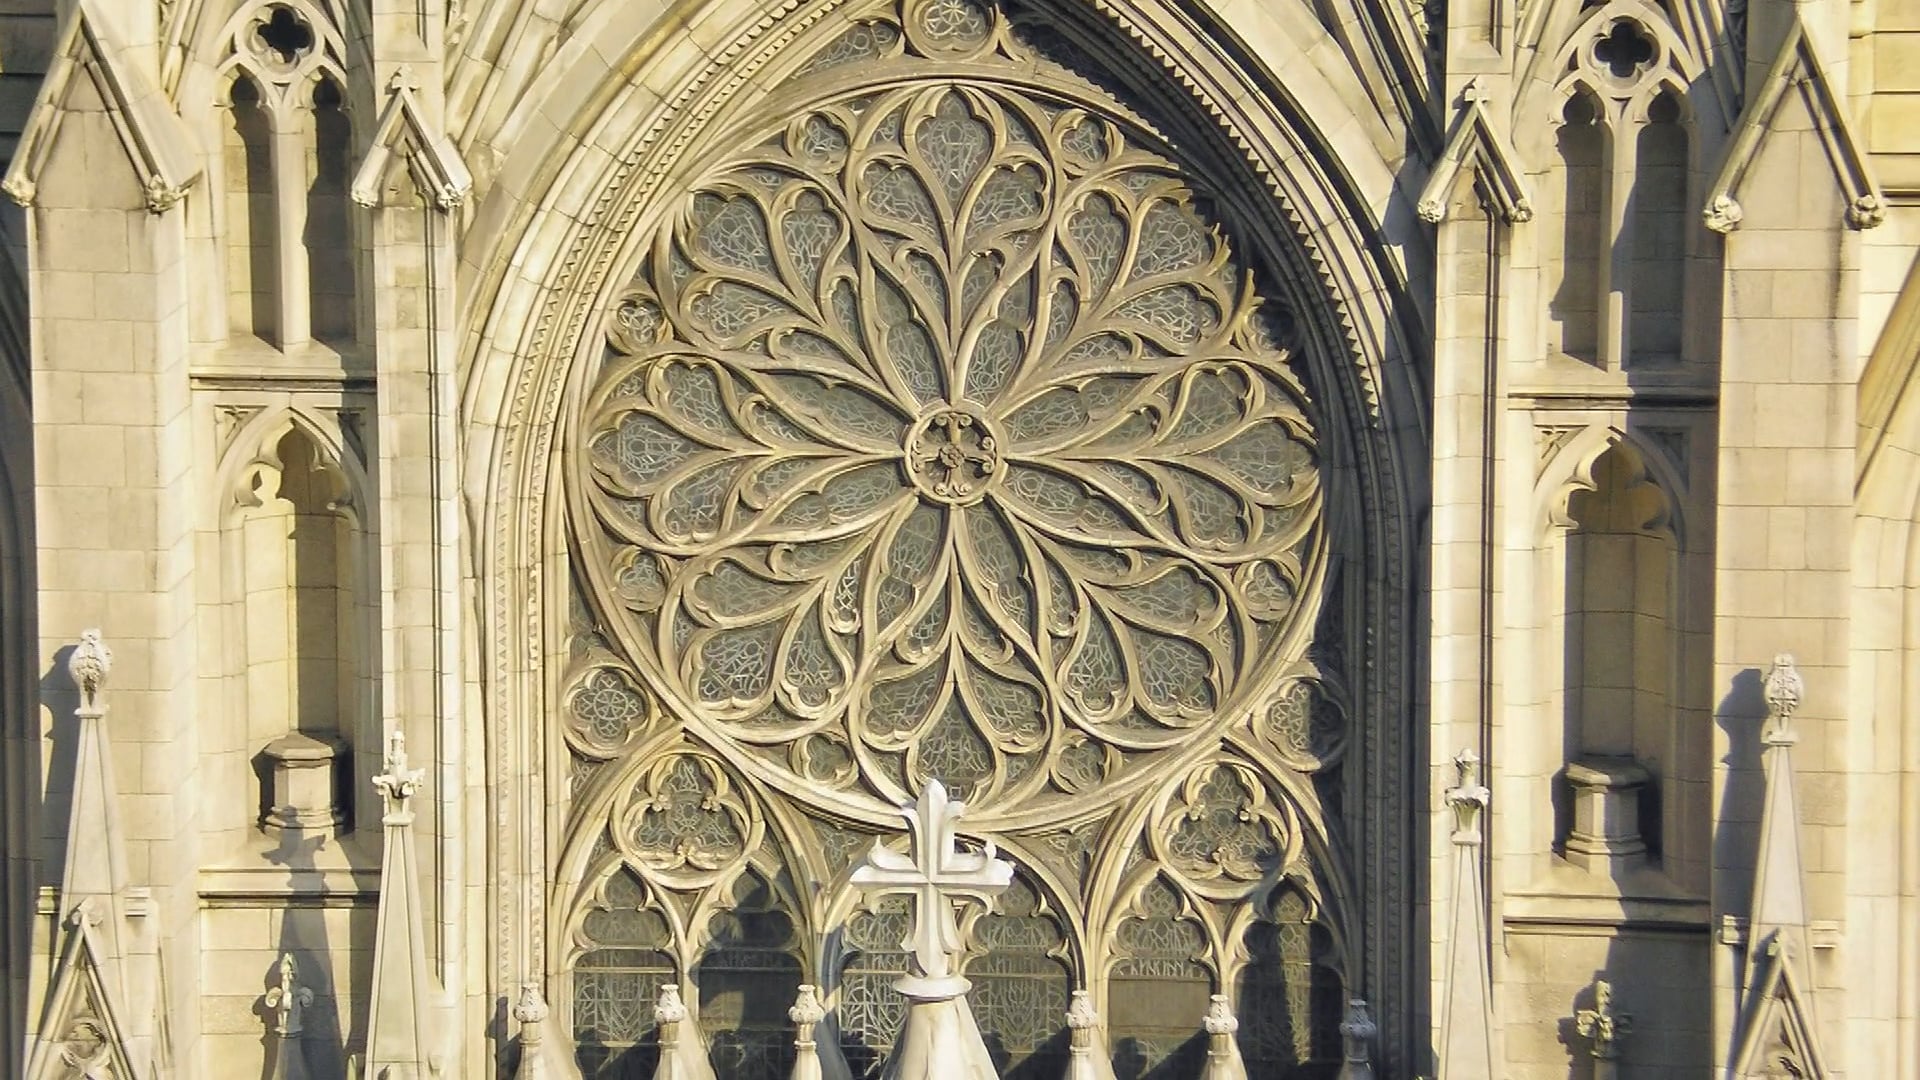 Mass from St. Patrick's Cathedral - May 24, 2022